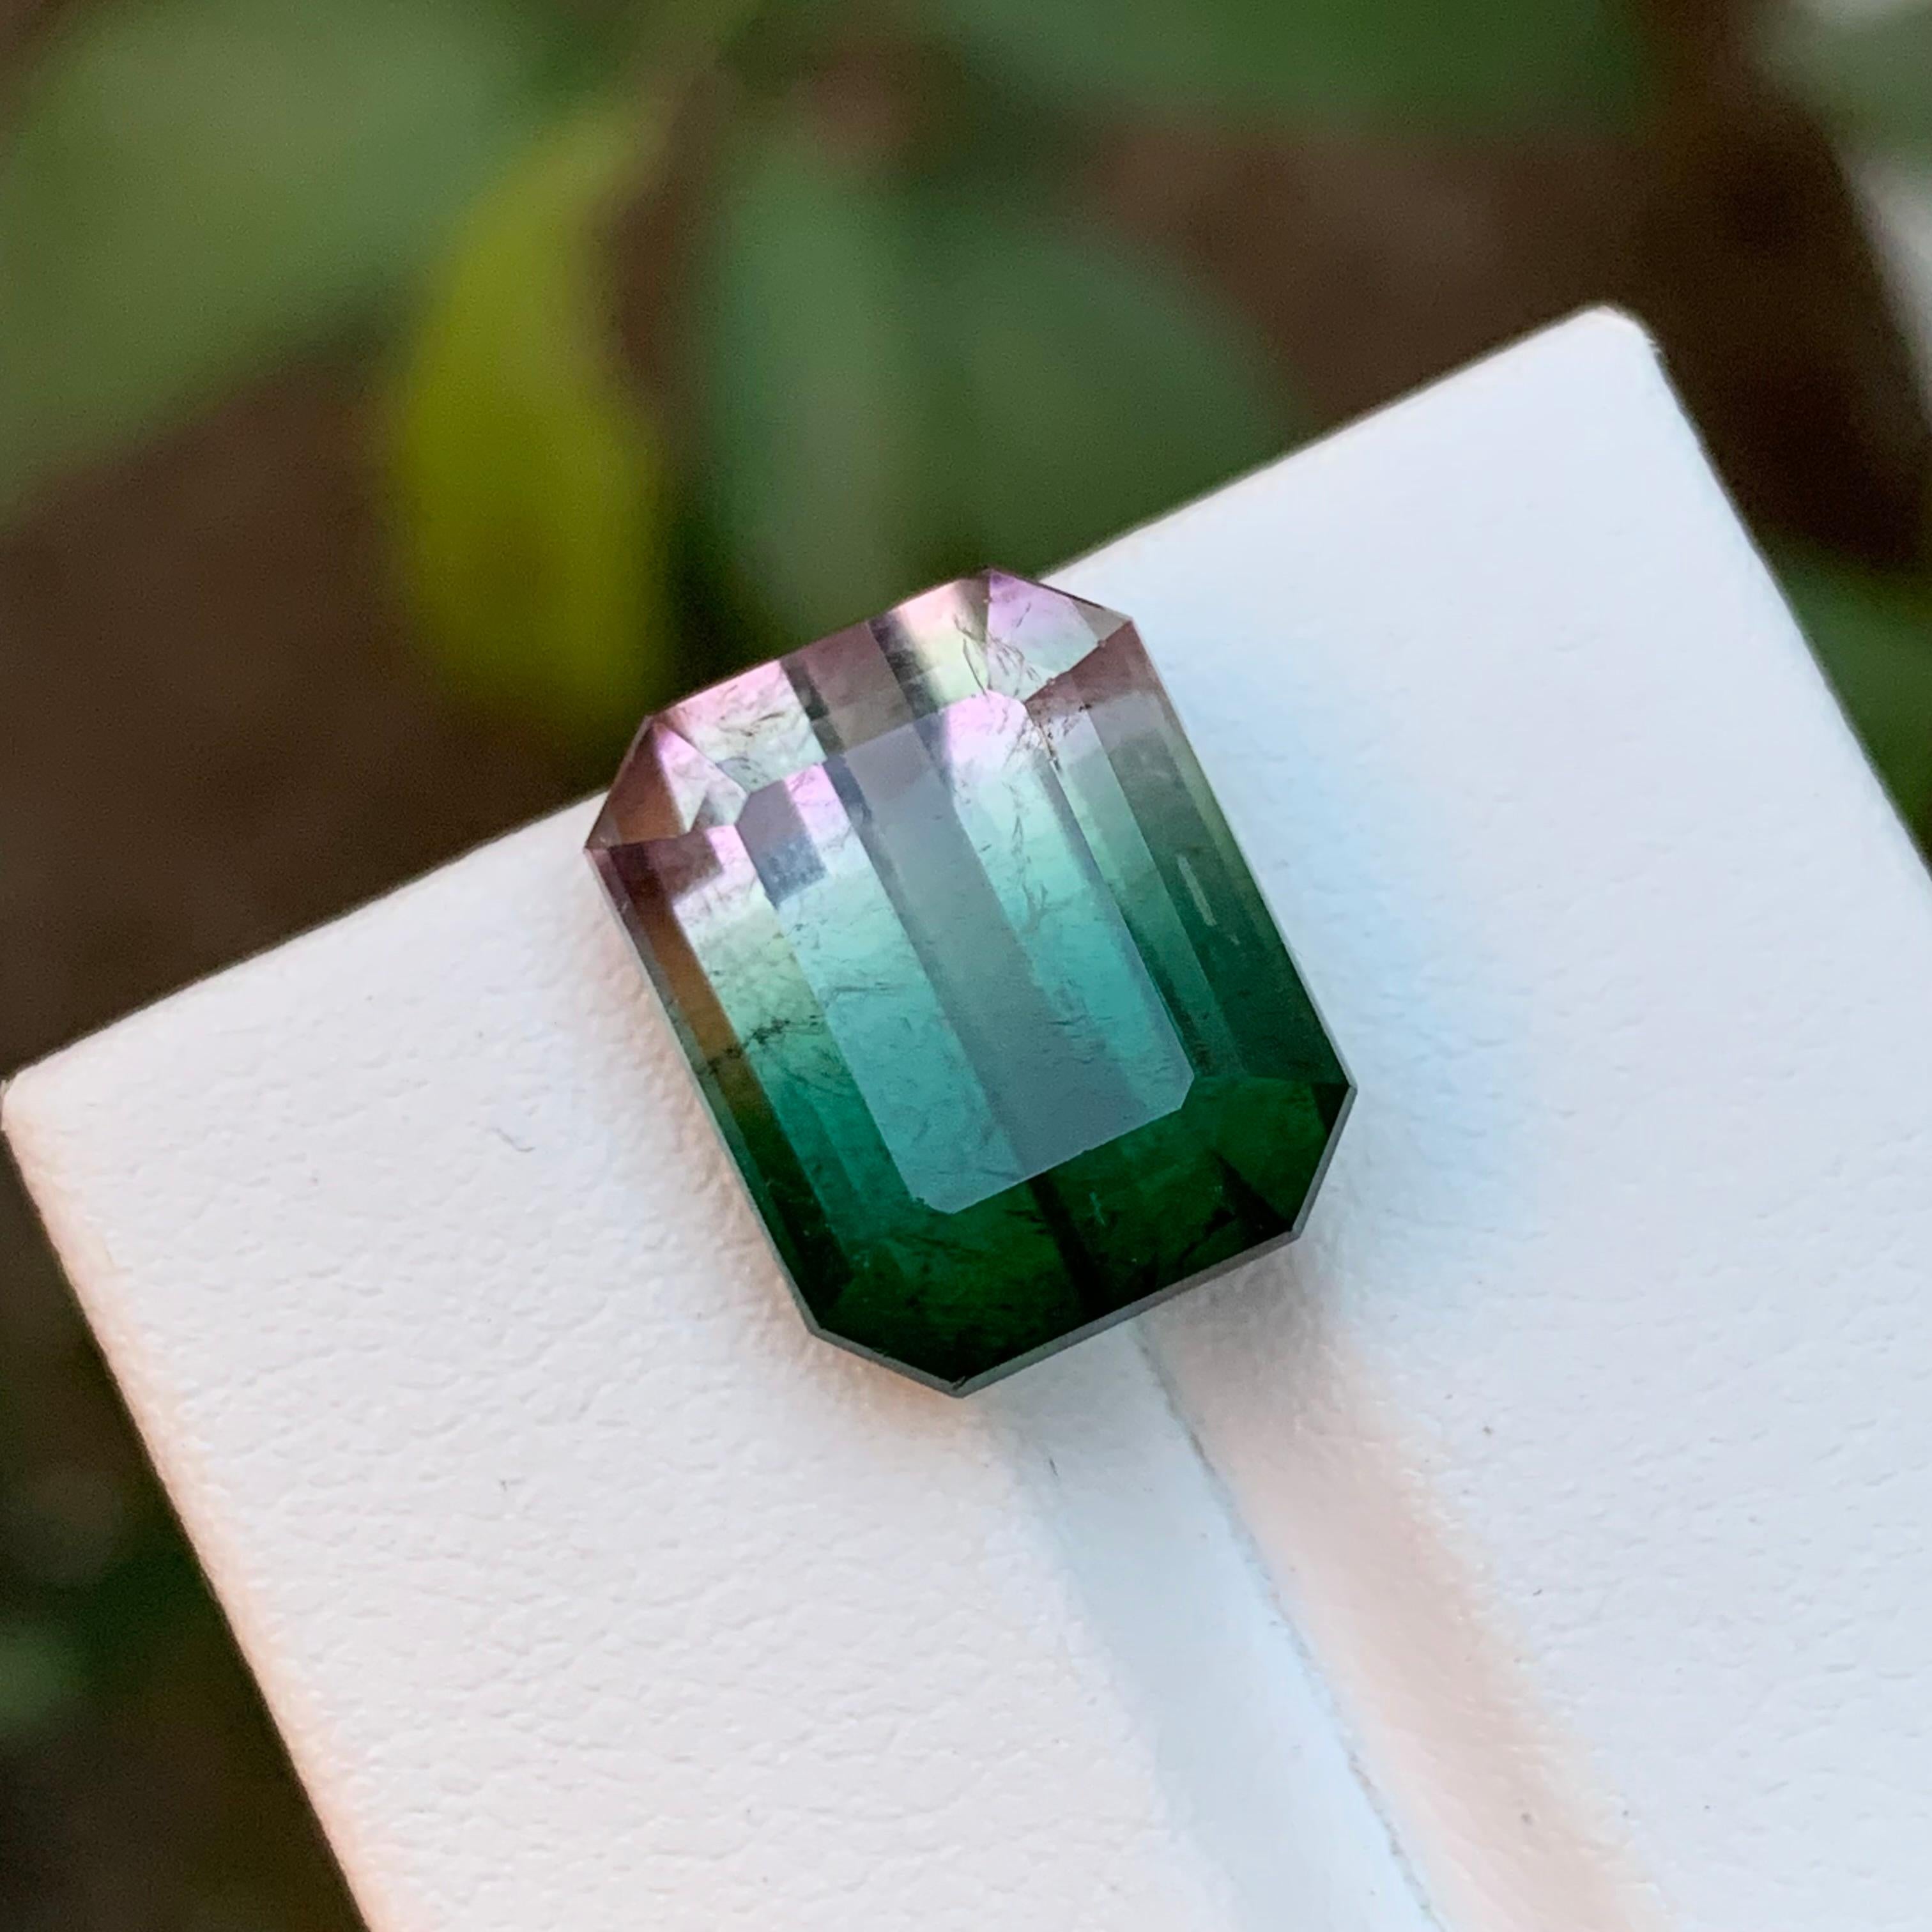 Contemporary Rare Watermelon Bicolor Bluish Green & Pink Afghan Tourmaline Gemstone, 13.15 Ct For Sale